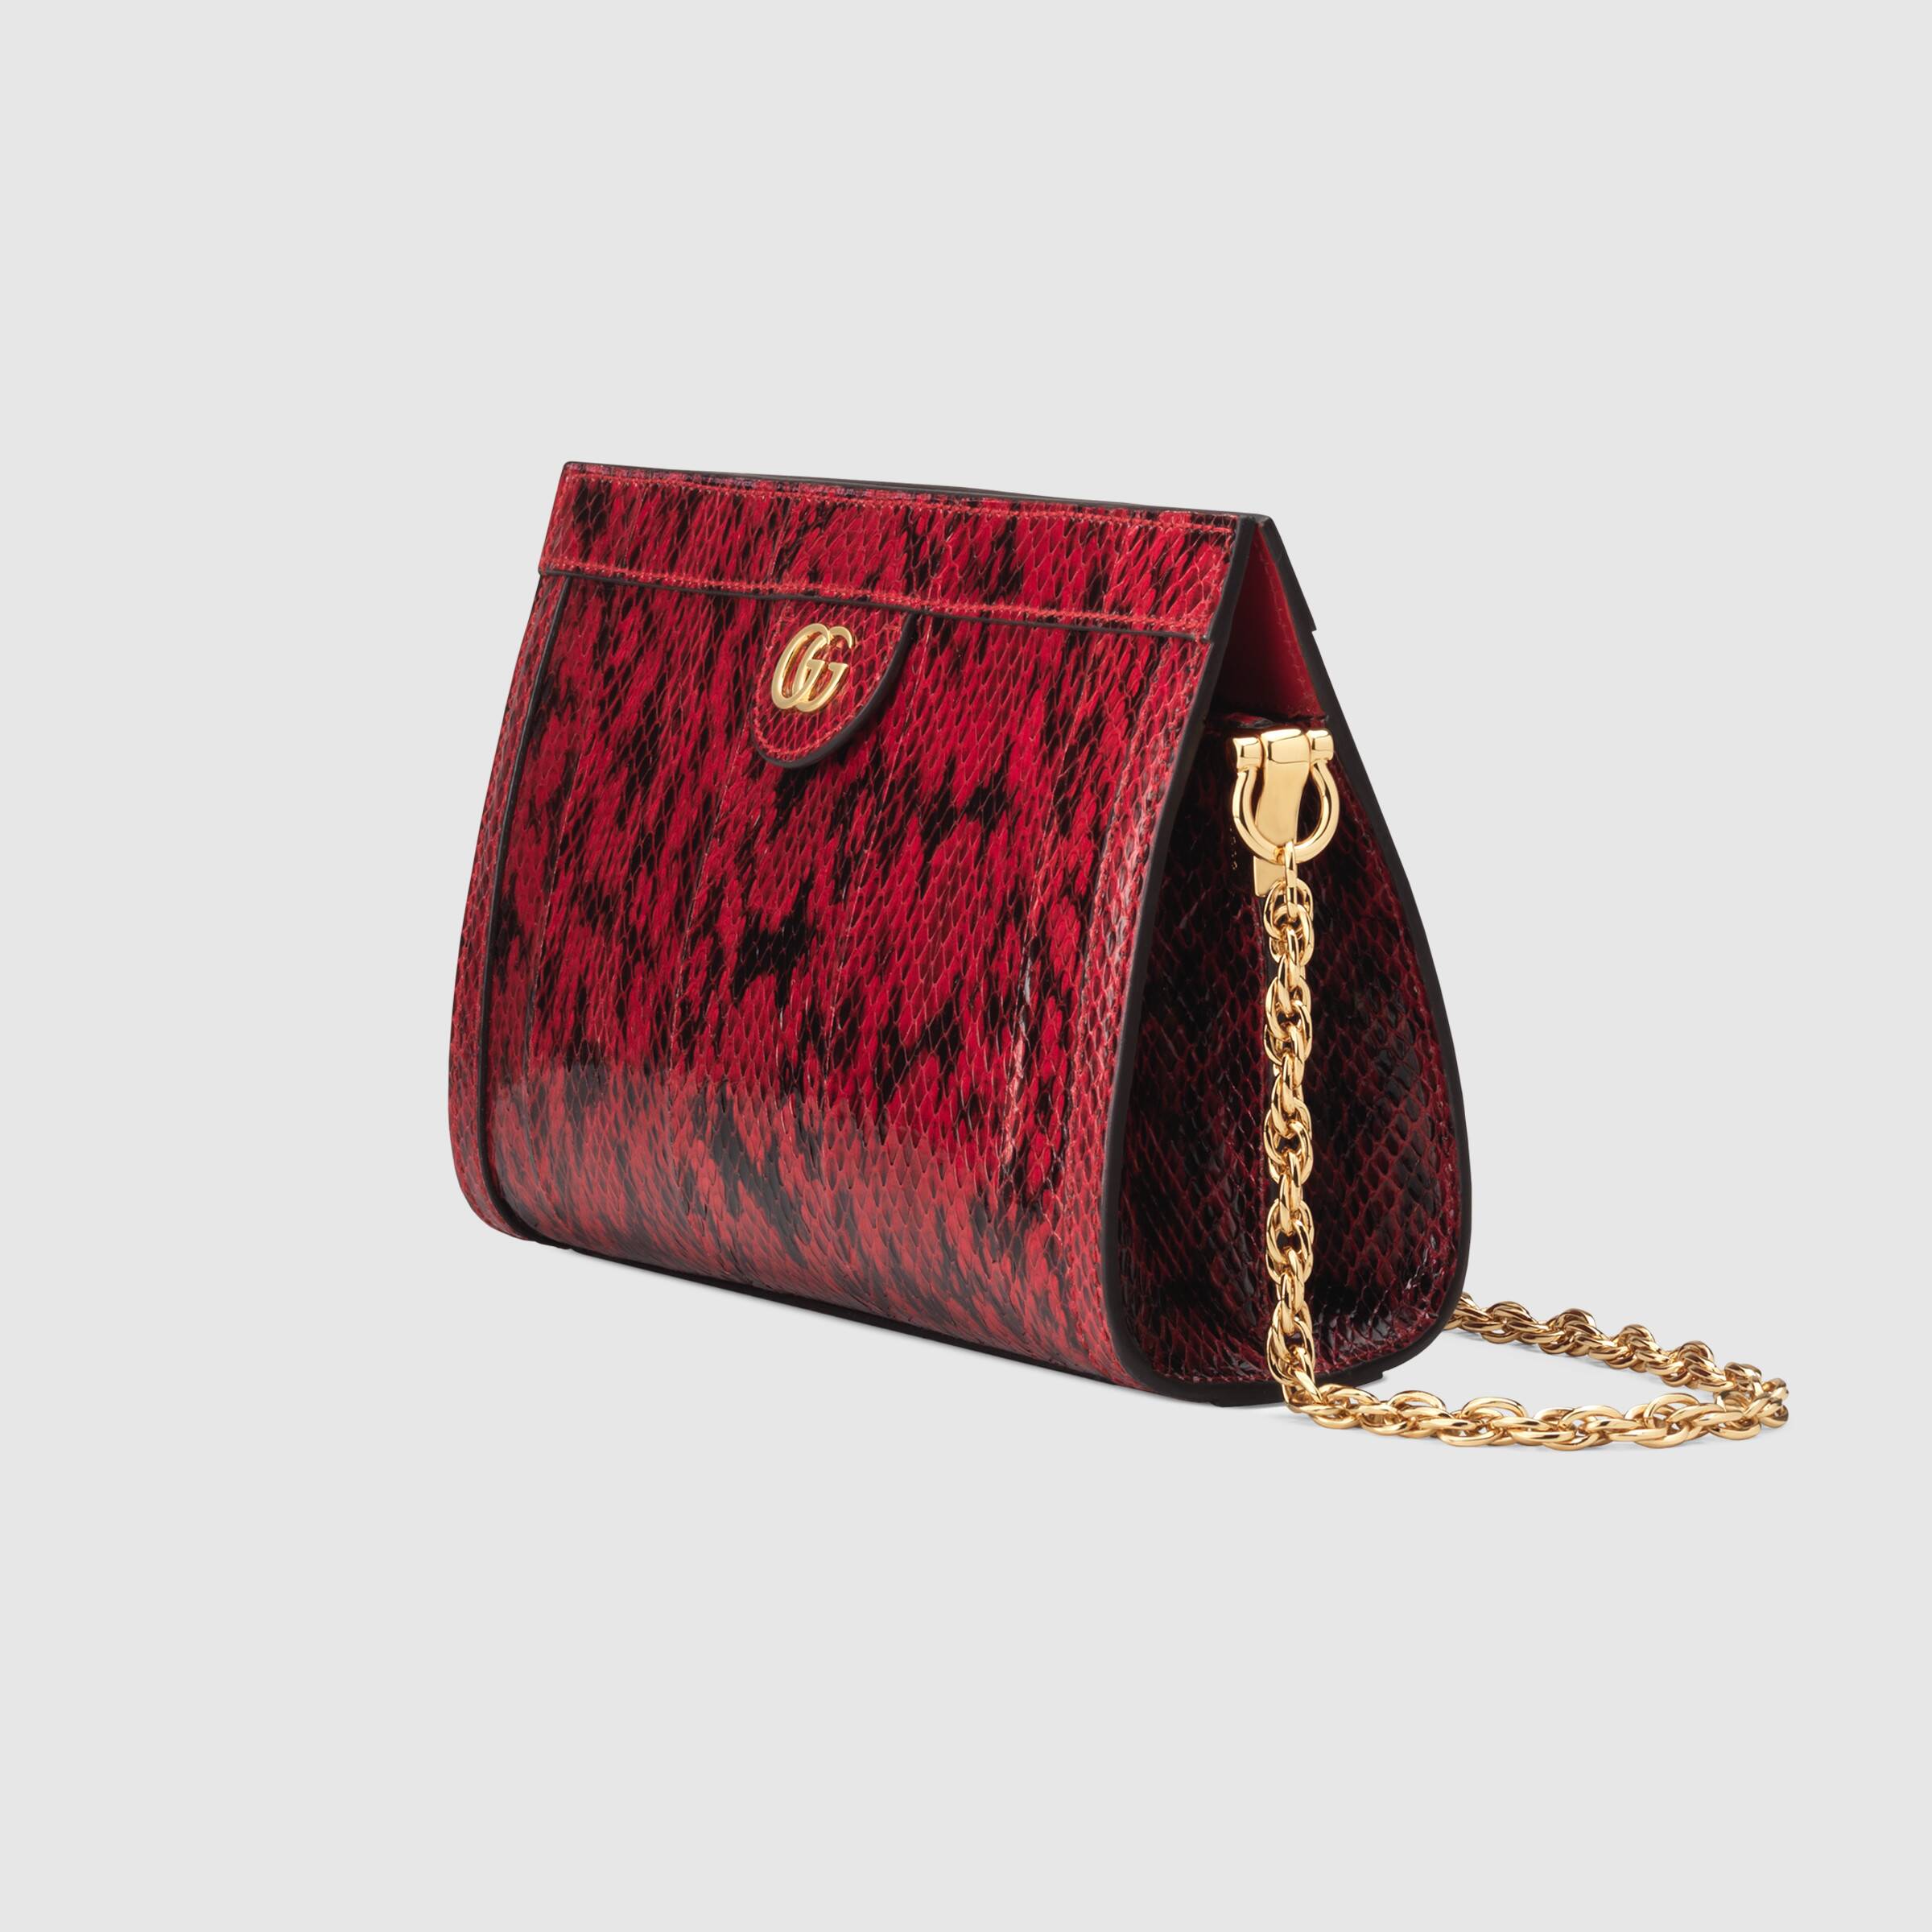 Gucci Ophidia Small Snakeskin Shoulder Bag Hibiscus Red